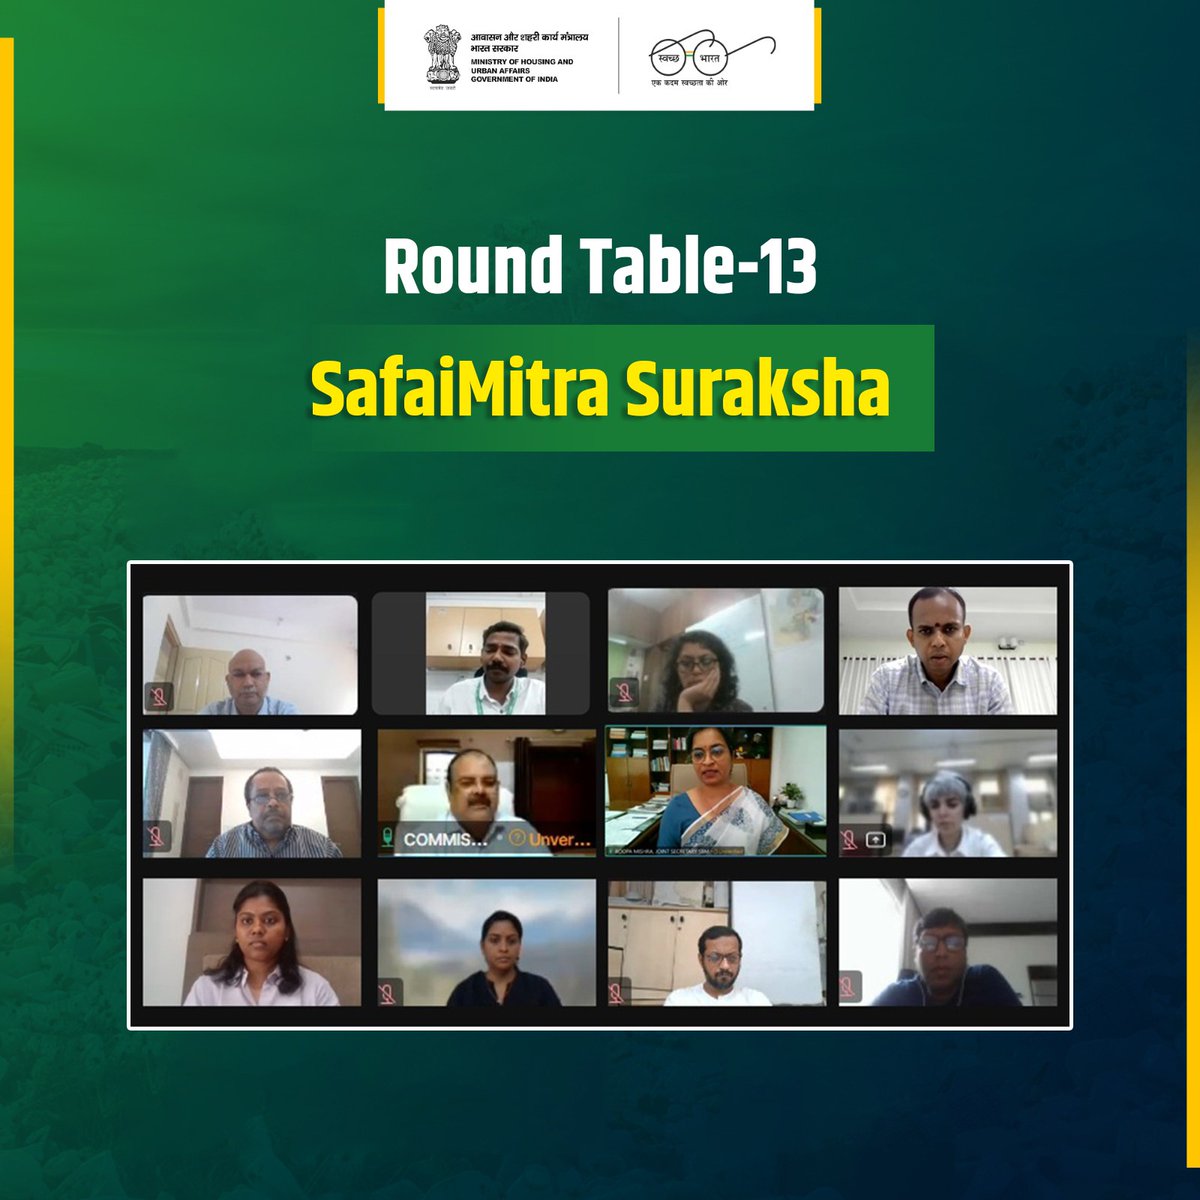 On Day 4 of Round Tables, the discussions focus on critical aspects of safe sanitation, access to quality toilets, Used Water Management, Bio-solid management & SafaiMitra Suraksha for a cleaner, safer, and healthier nation. 
#GarbageFreeIndia #WasteToWealth